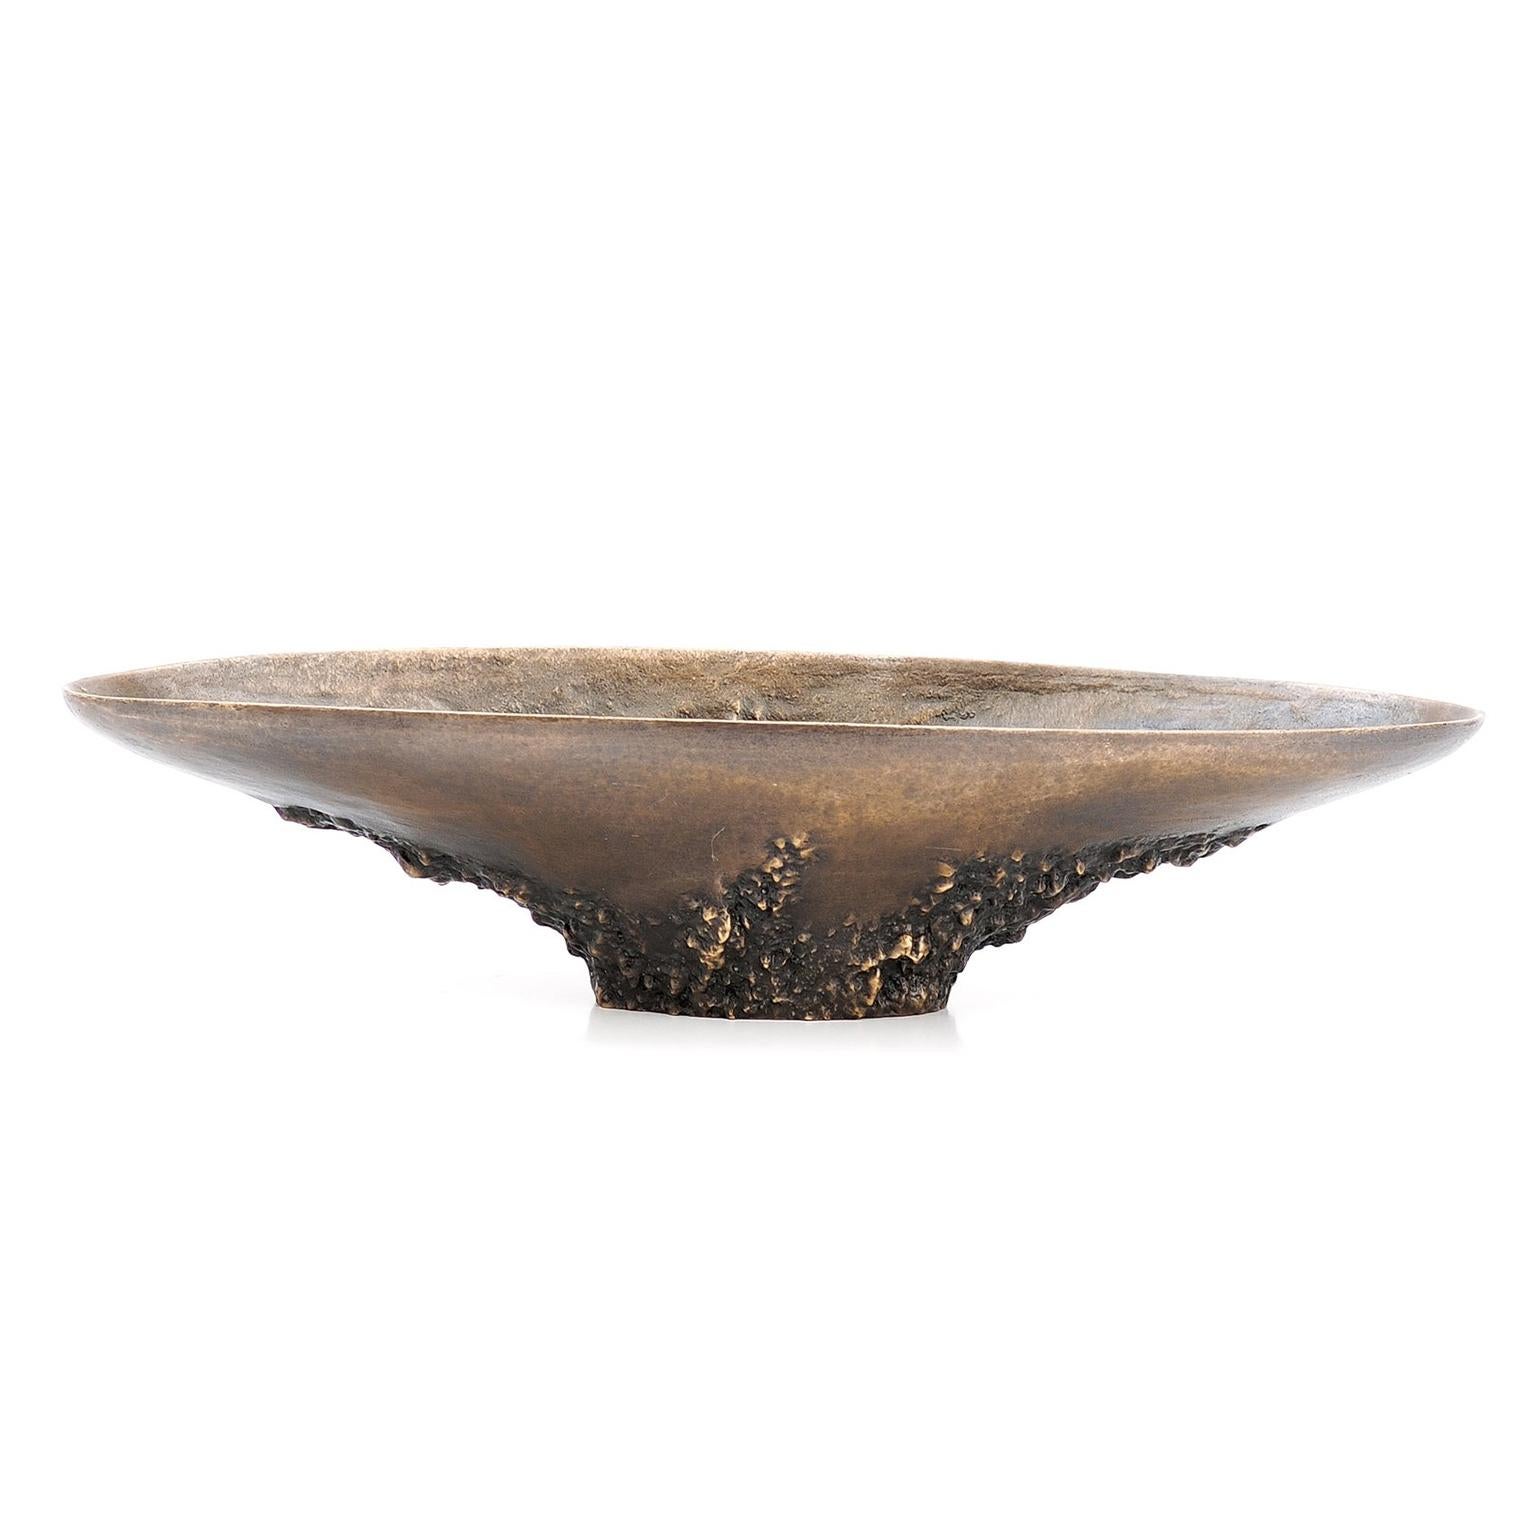 O'Connor bowl forged from cast dark bronze by Fakasaka.